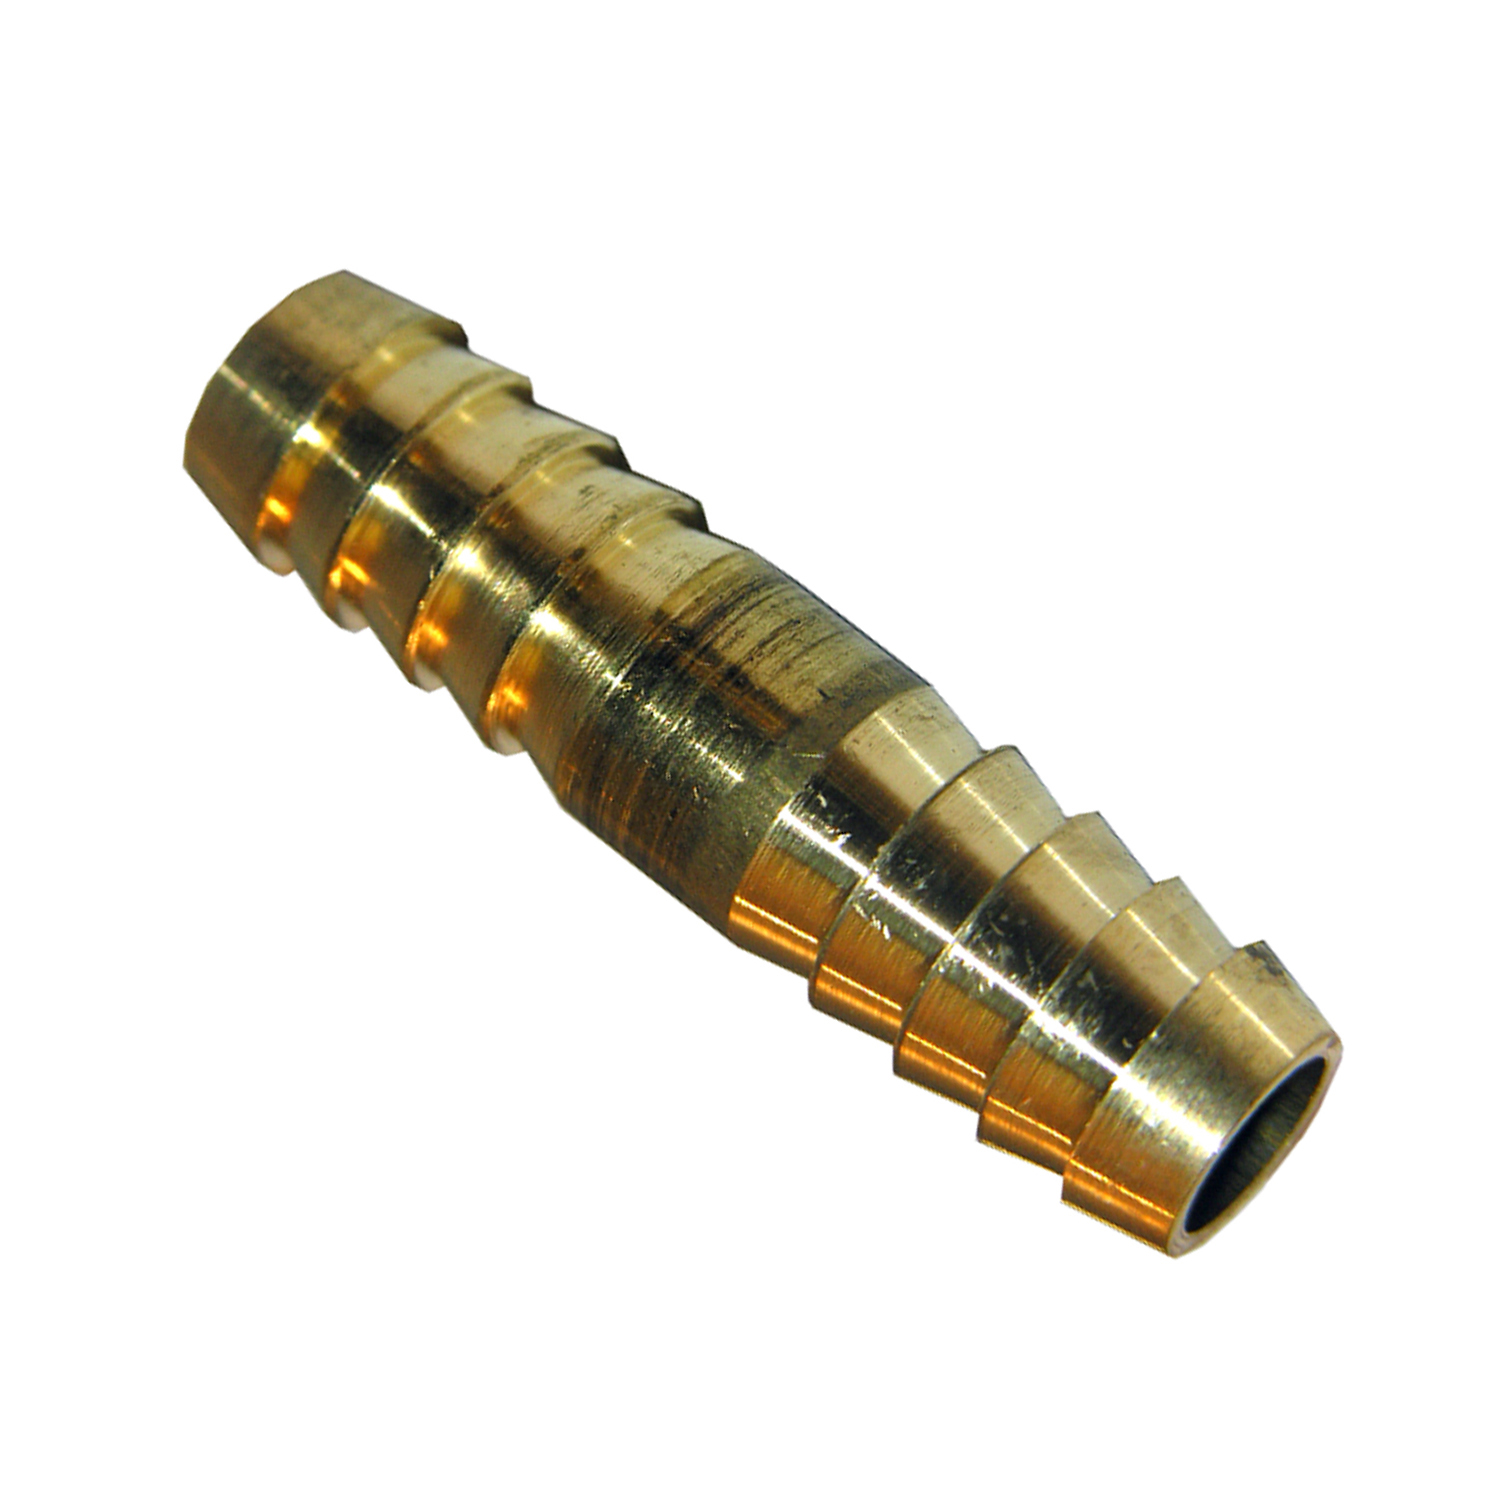 Lasco 17-7531 Coupling, 3/8 in, Barb, Brass